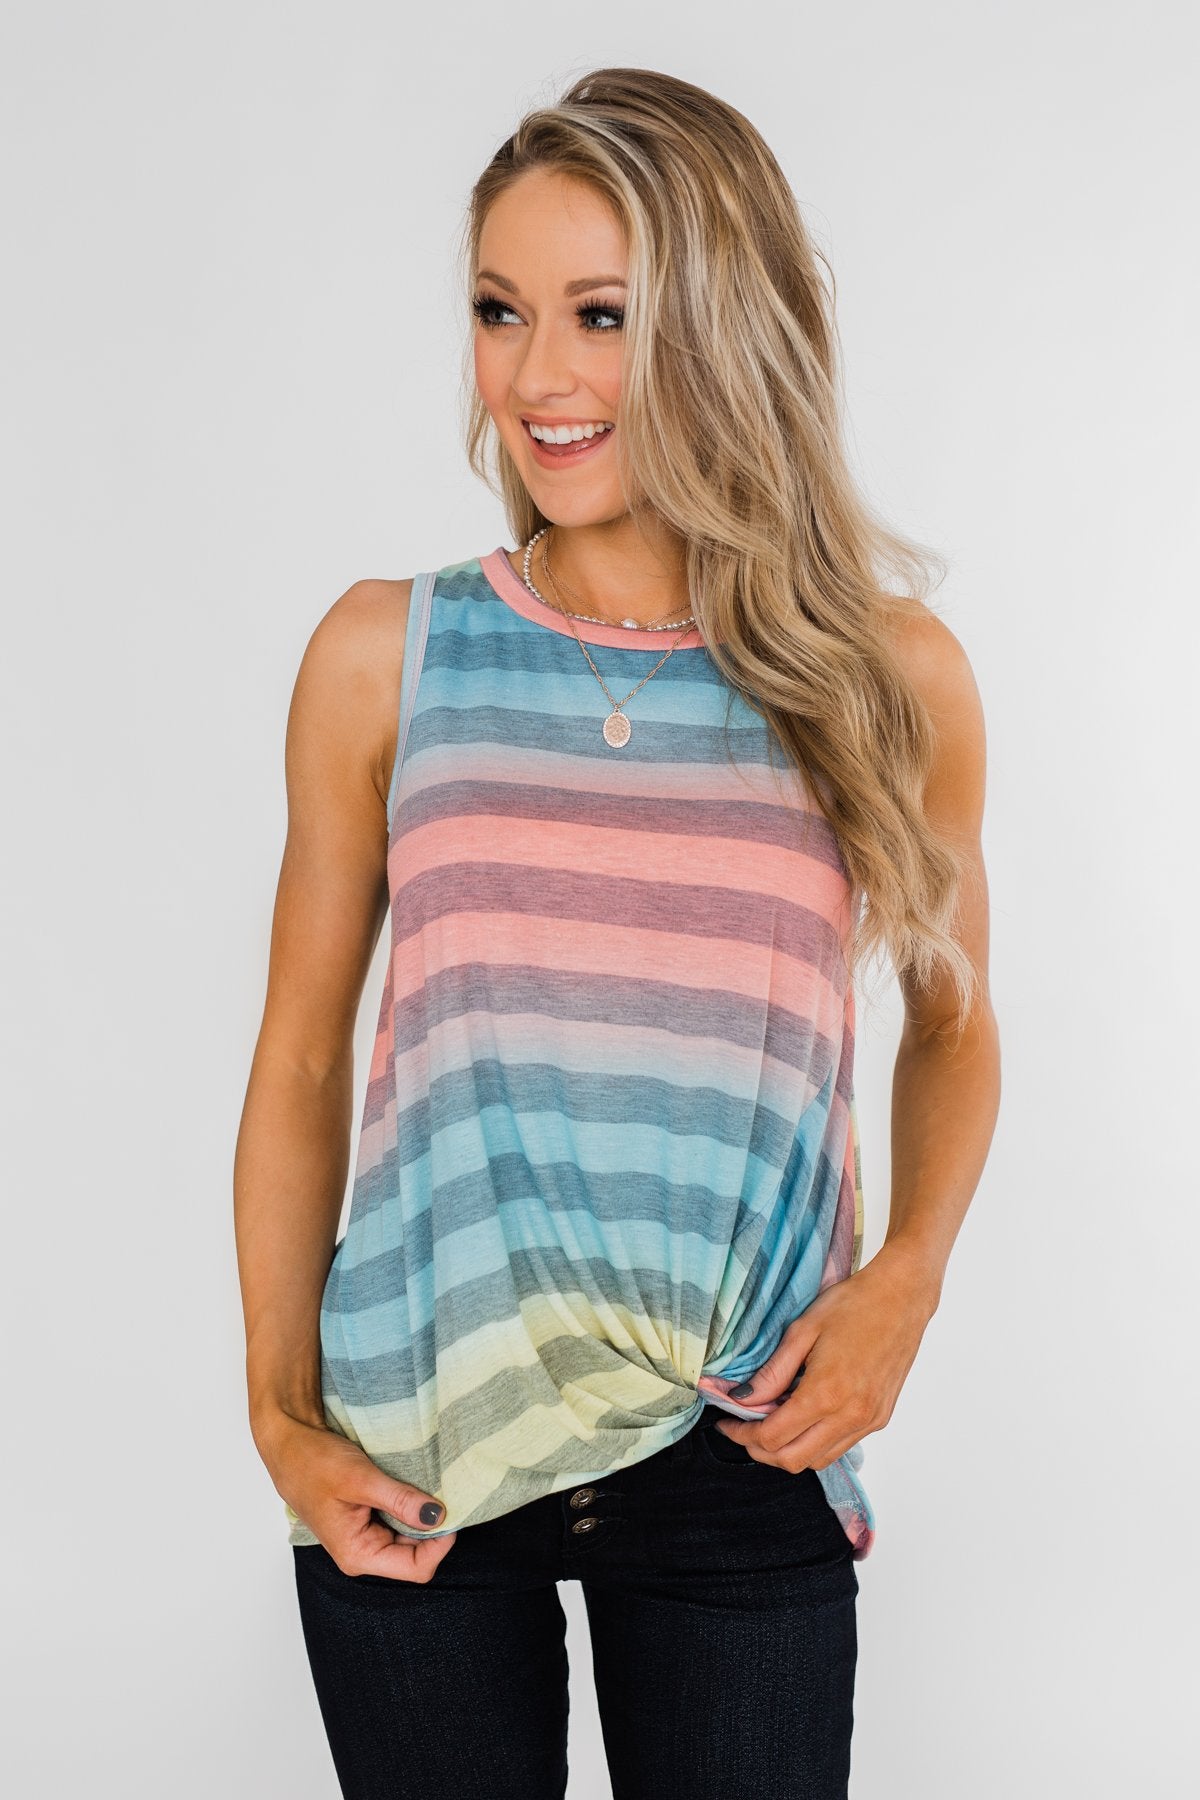 Together With You Striped Twist Top- Multi-Colored – The Pulse Boutique